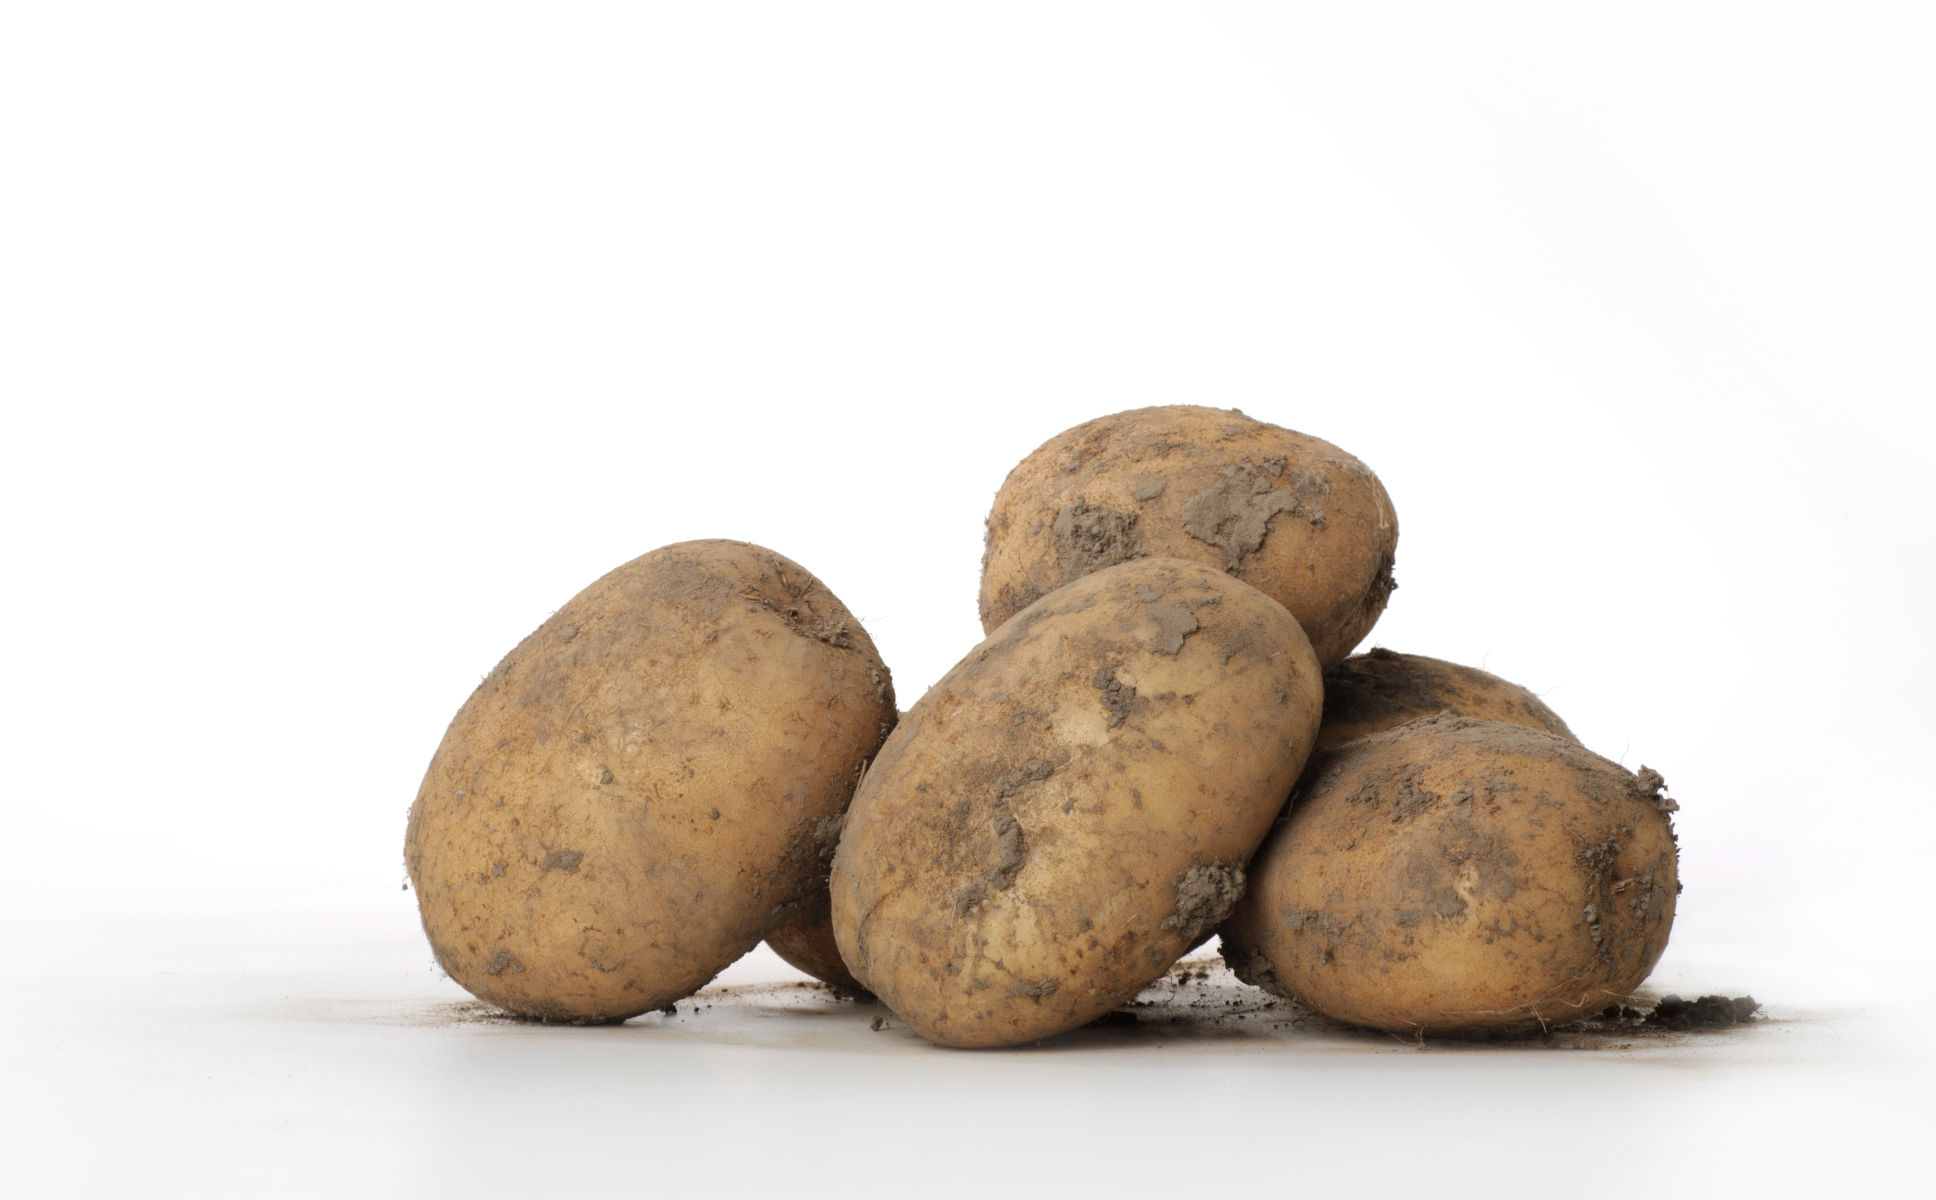 Super spuds for year-round supply